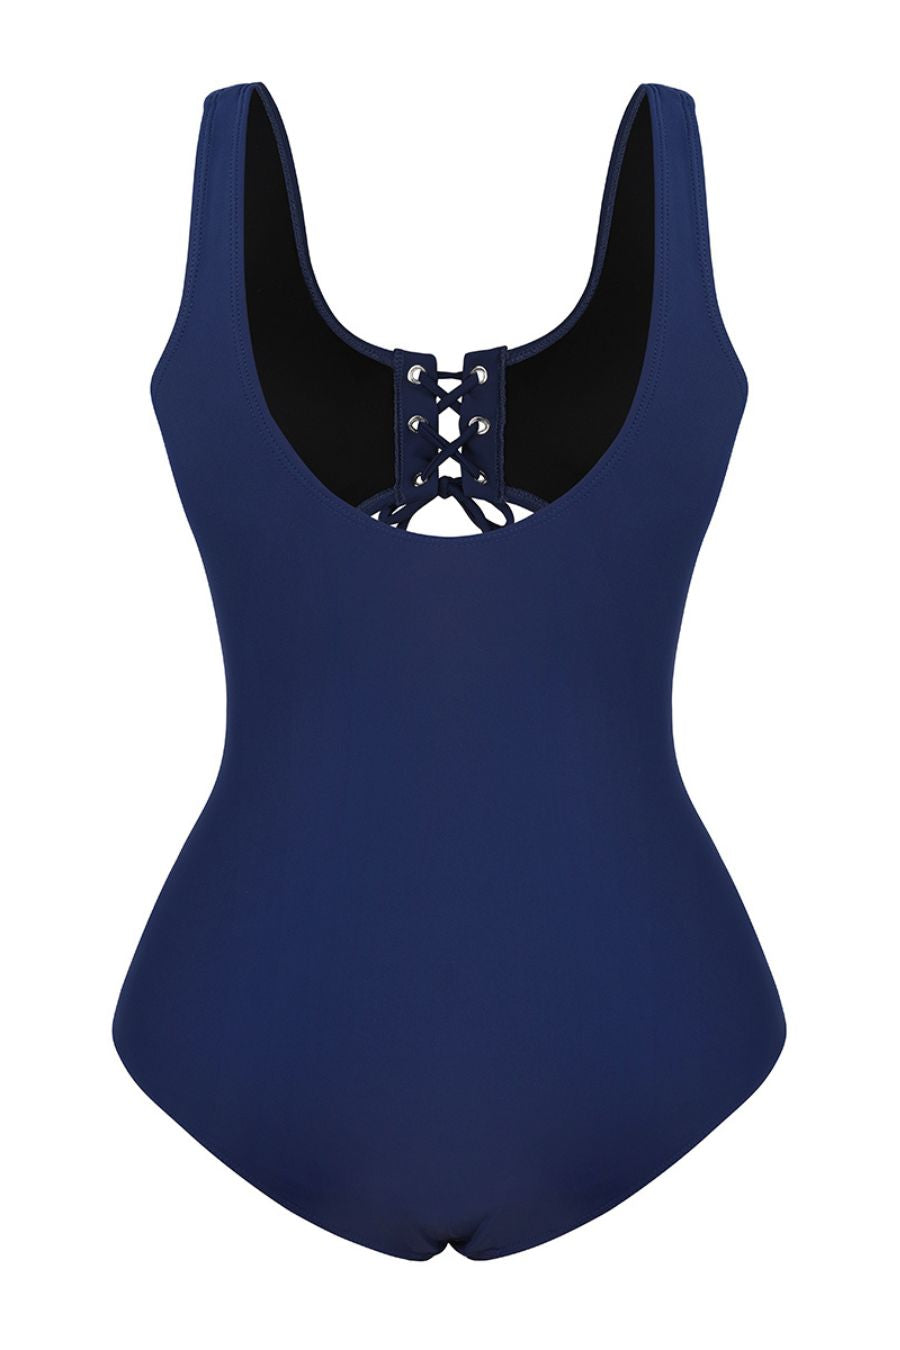 Diosa Shaping Swimsuit - Midnight Sky